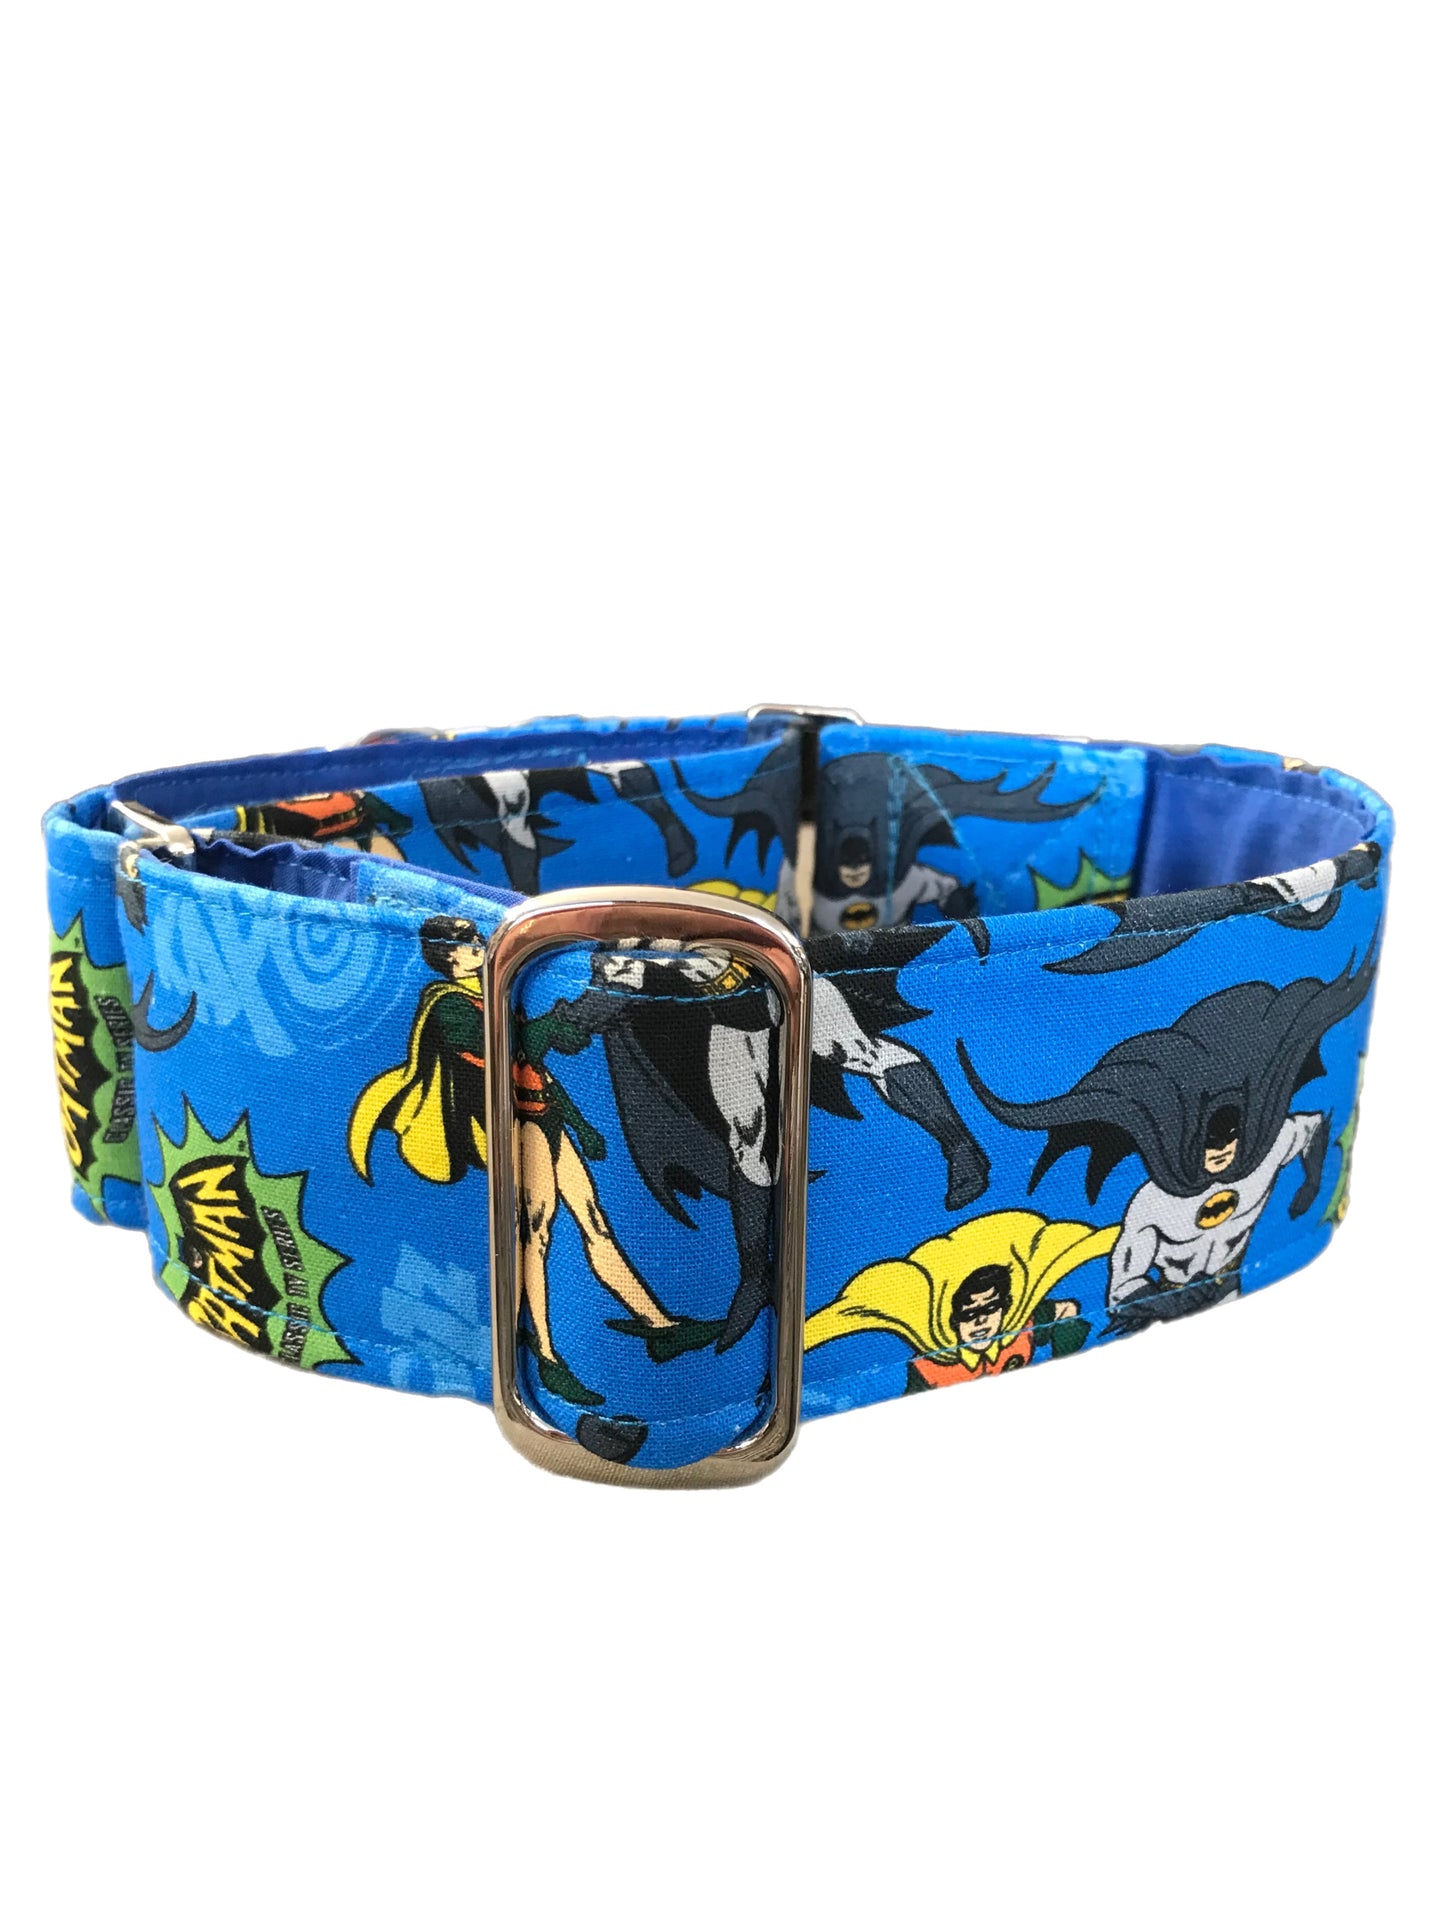 Cotton covered greyhound Martingale collar blue Batman and Robin 50mm width super soft